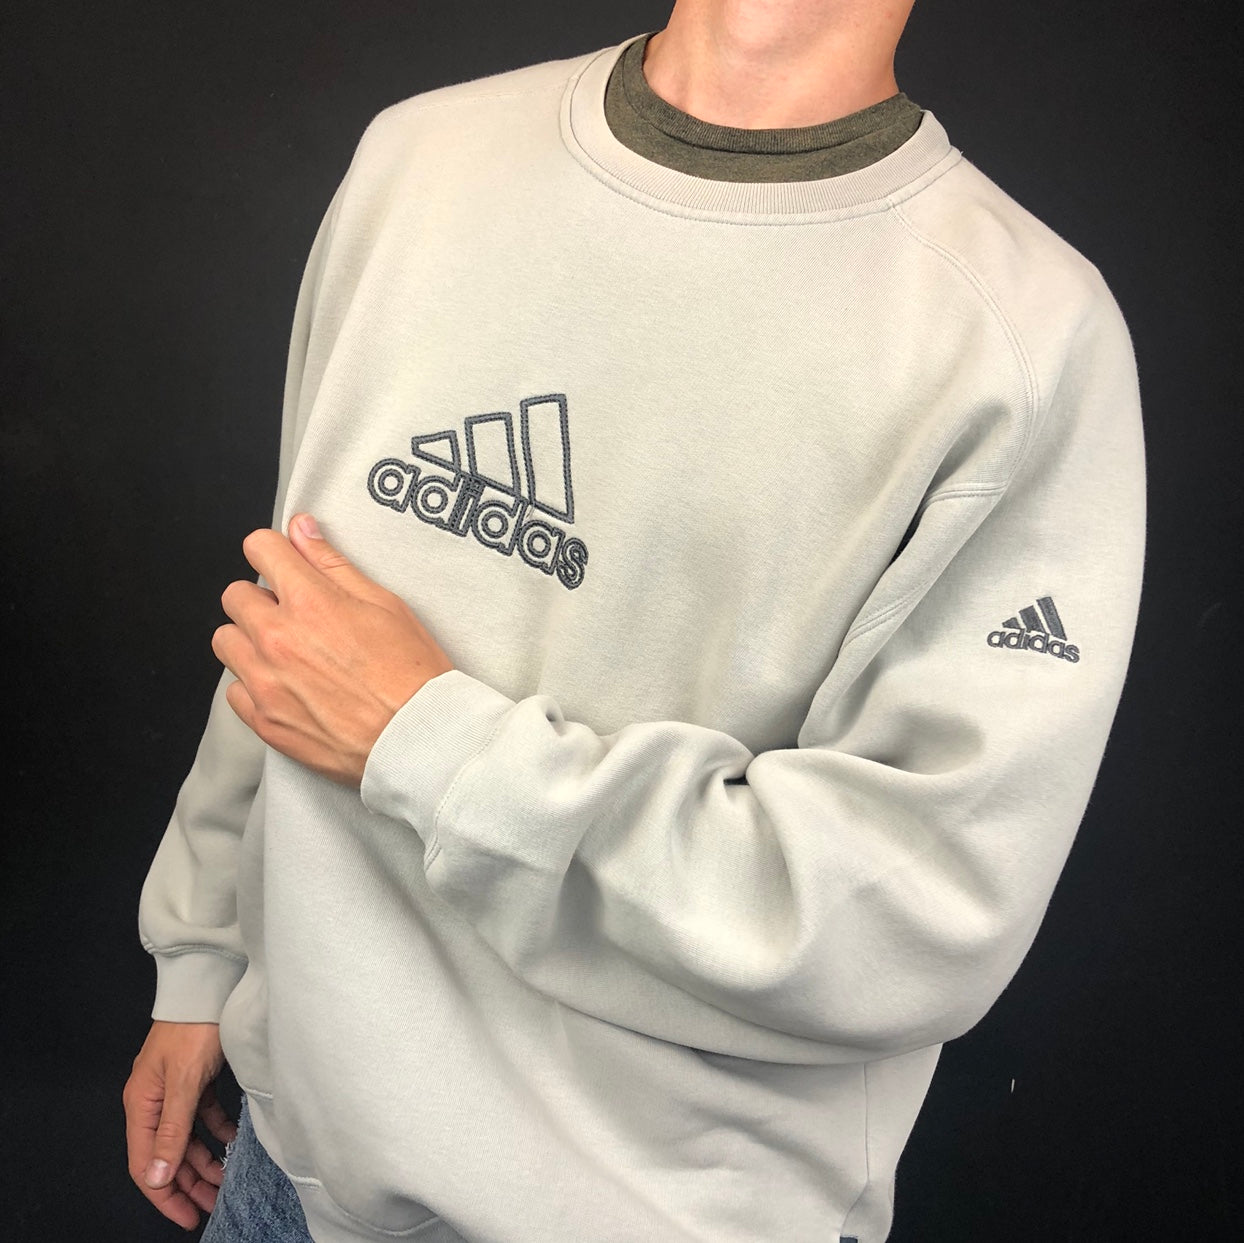 Vintage Adidas Sweatshirt with Embroidered Spellout